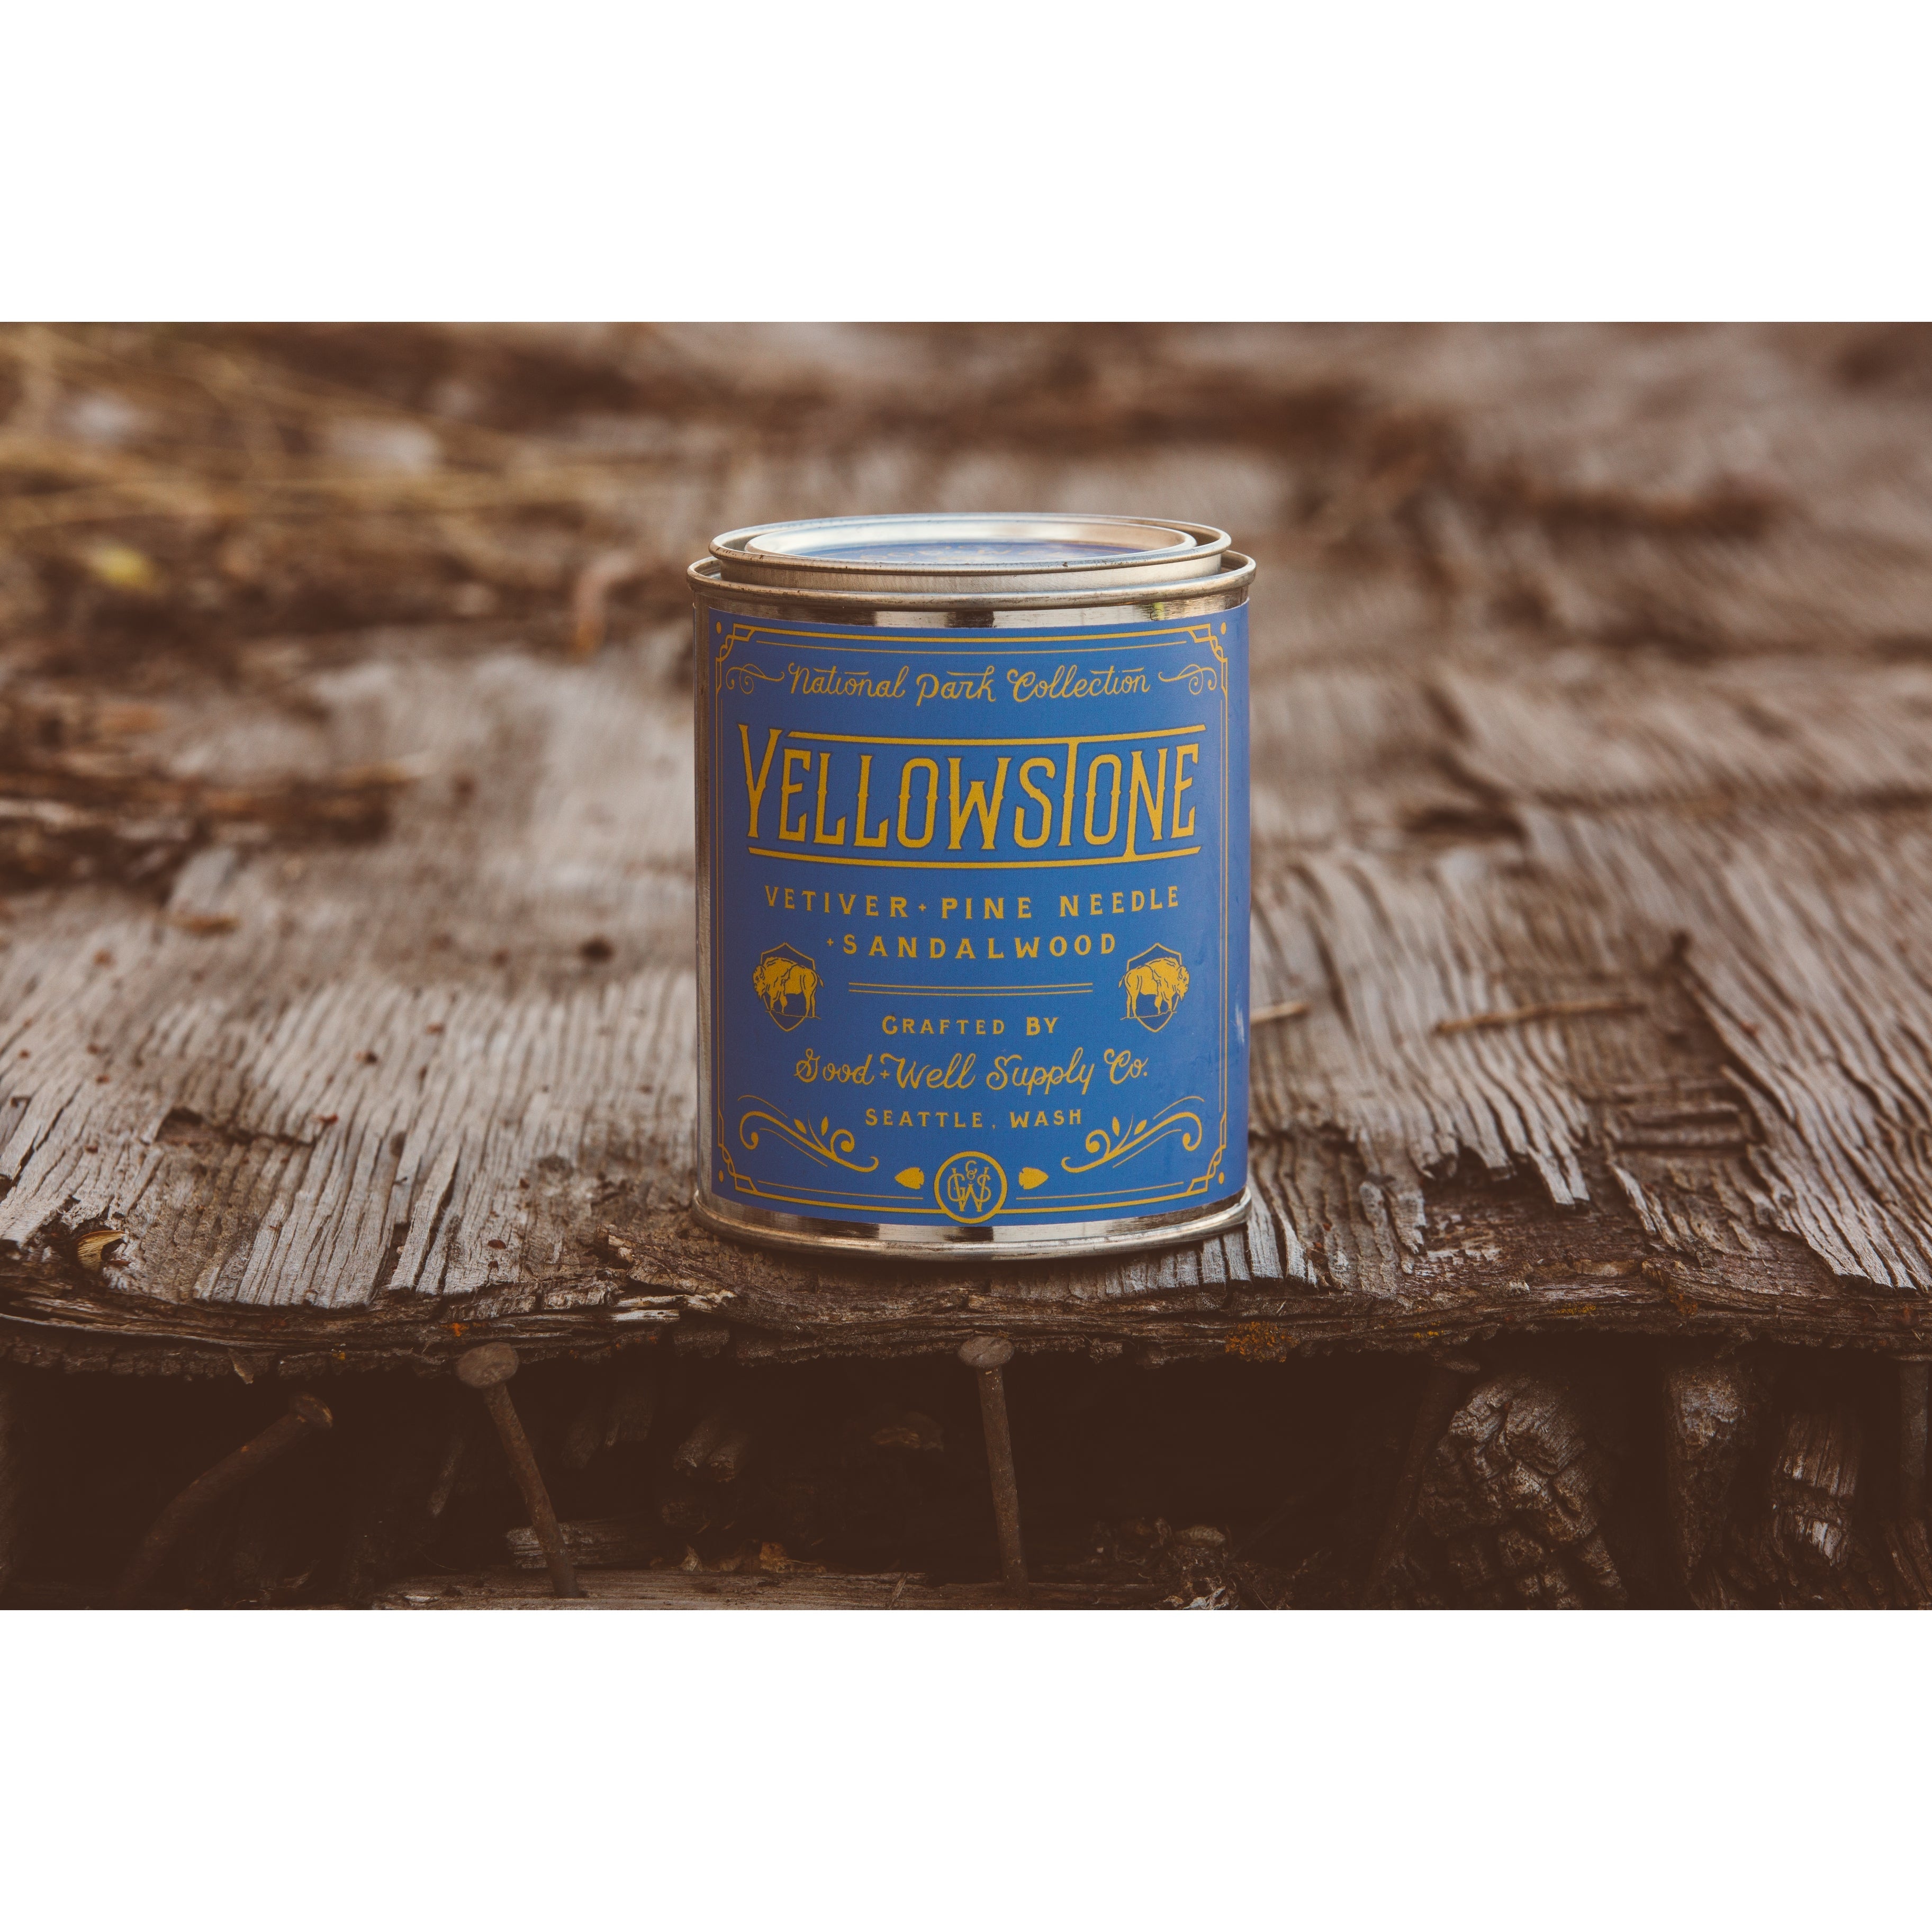 Yellowstone Candle - Vetiver, Pine Needle & Sandalwood 1/2 Pint With Wooden Wick, Candles, Good & Well Supply Co., Defiance Outdoor Gear Co.